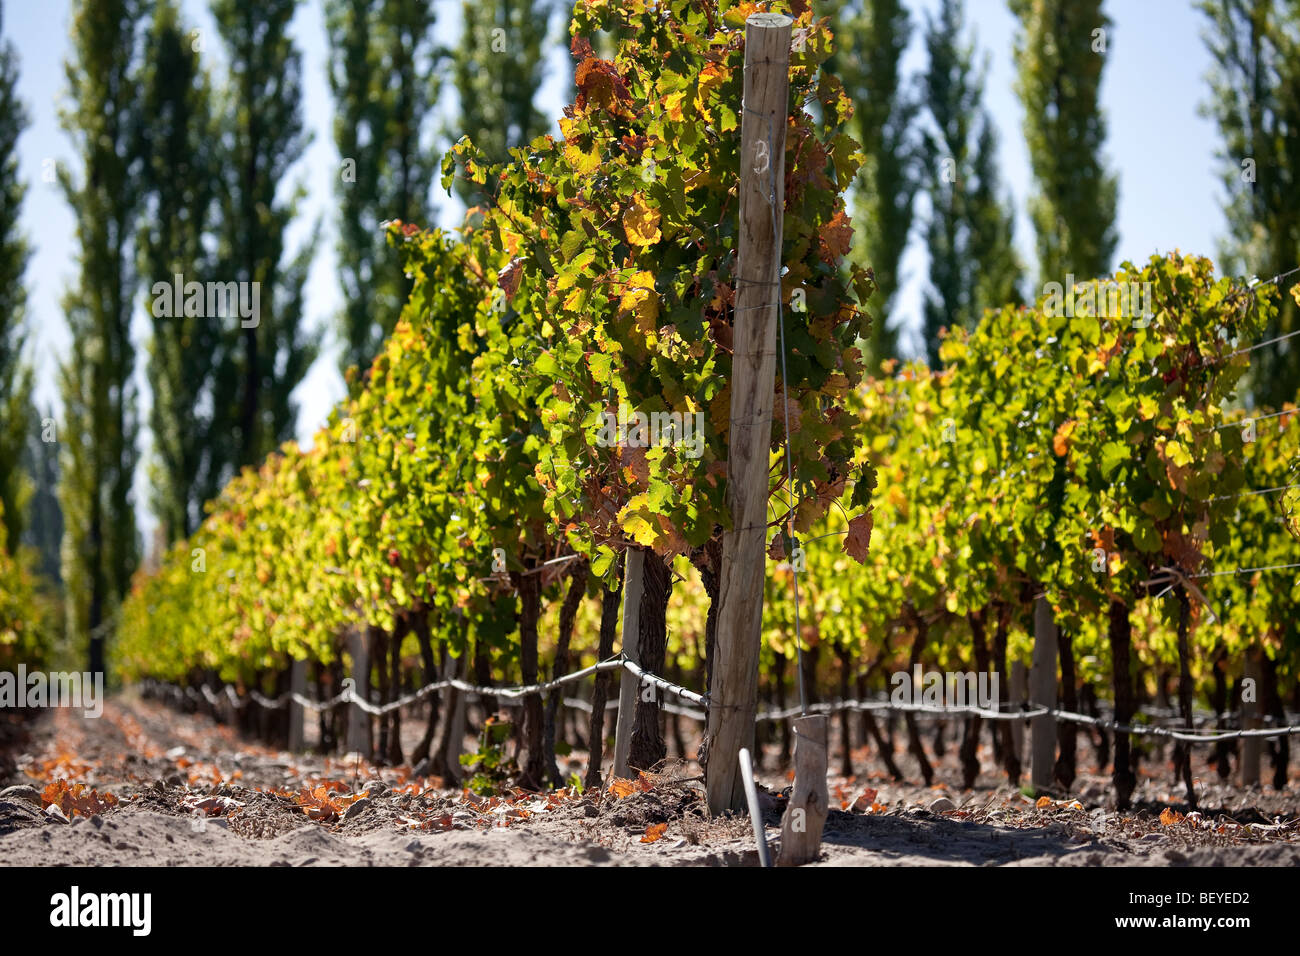 Vineyard in Uco Valley, detail of drop by drop irrigation system, Tupungato, Mendoza province, Central Andes, Argentina Stock Photo